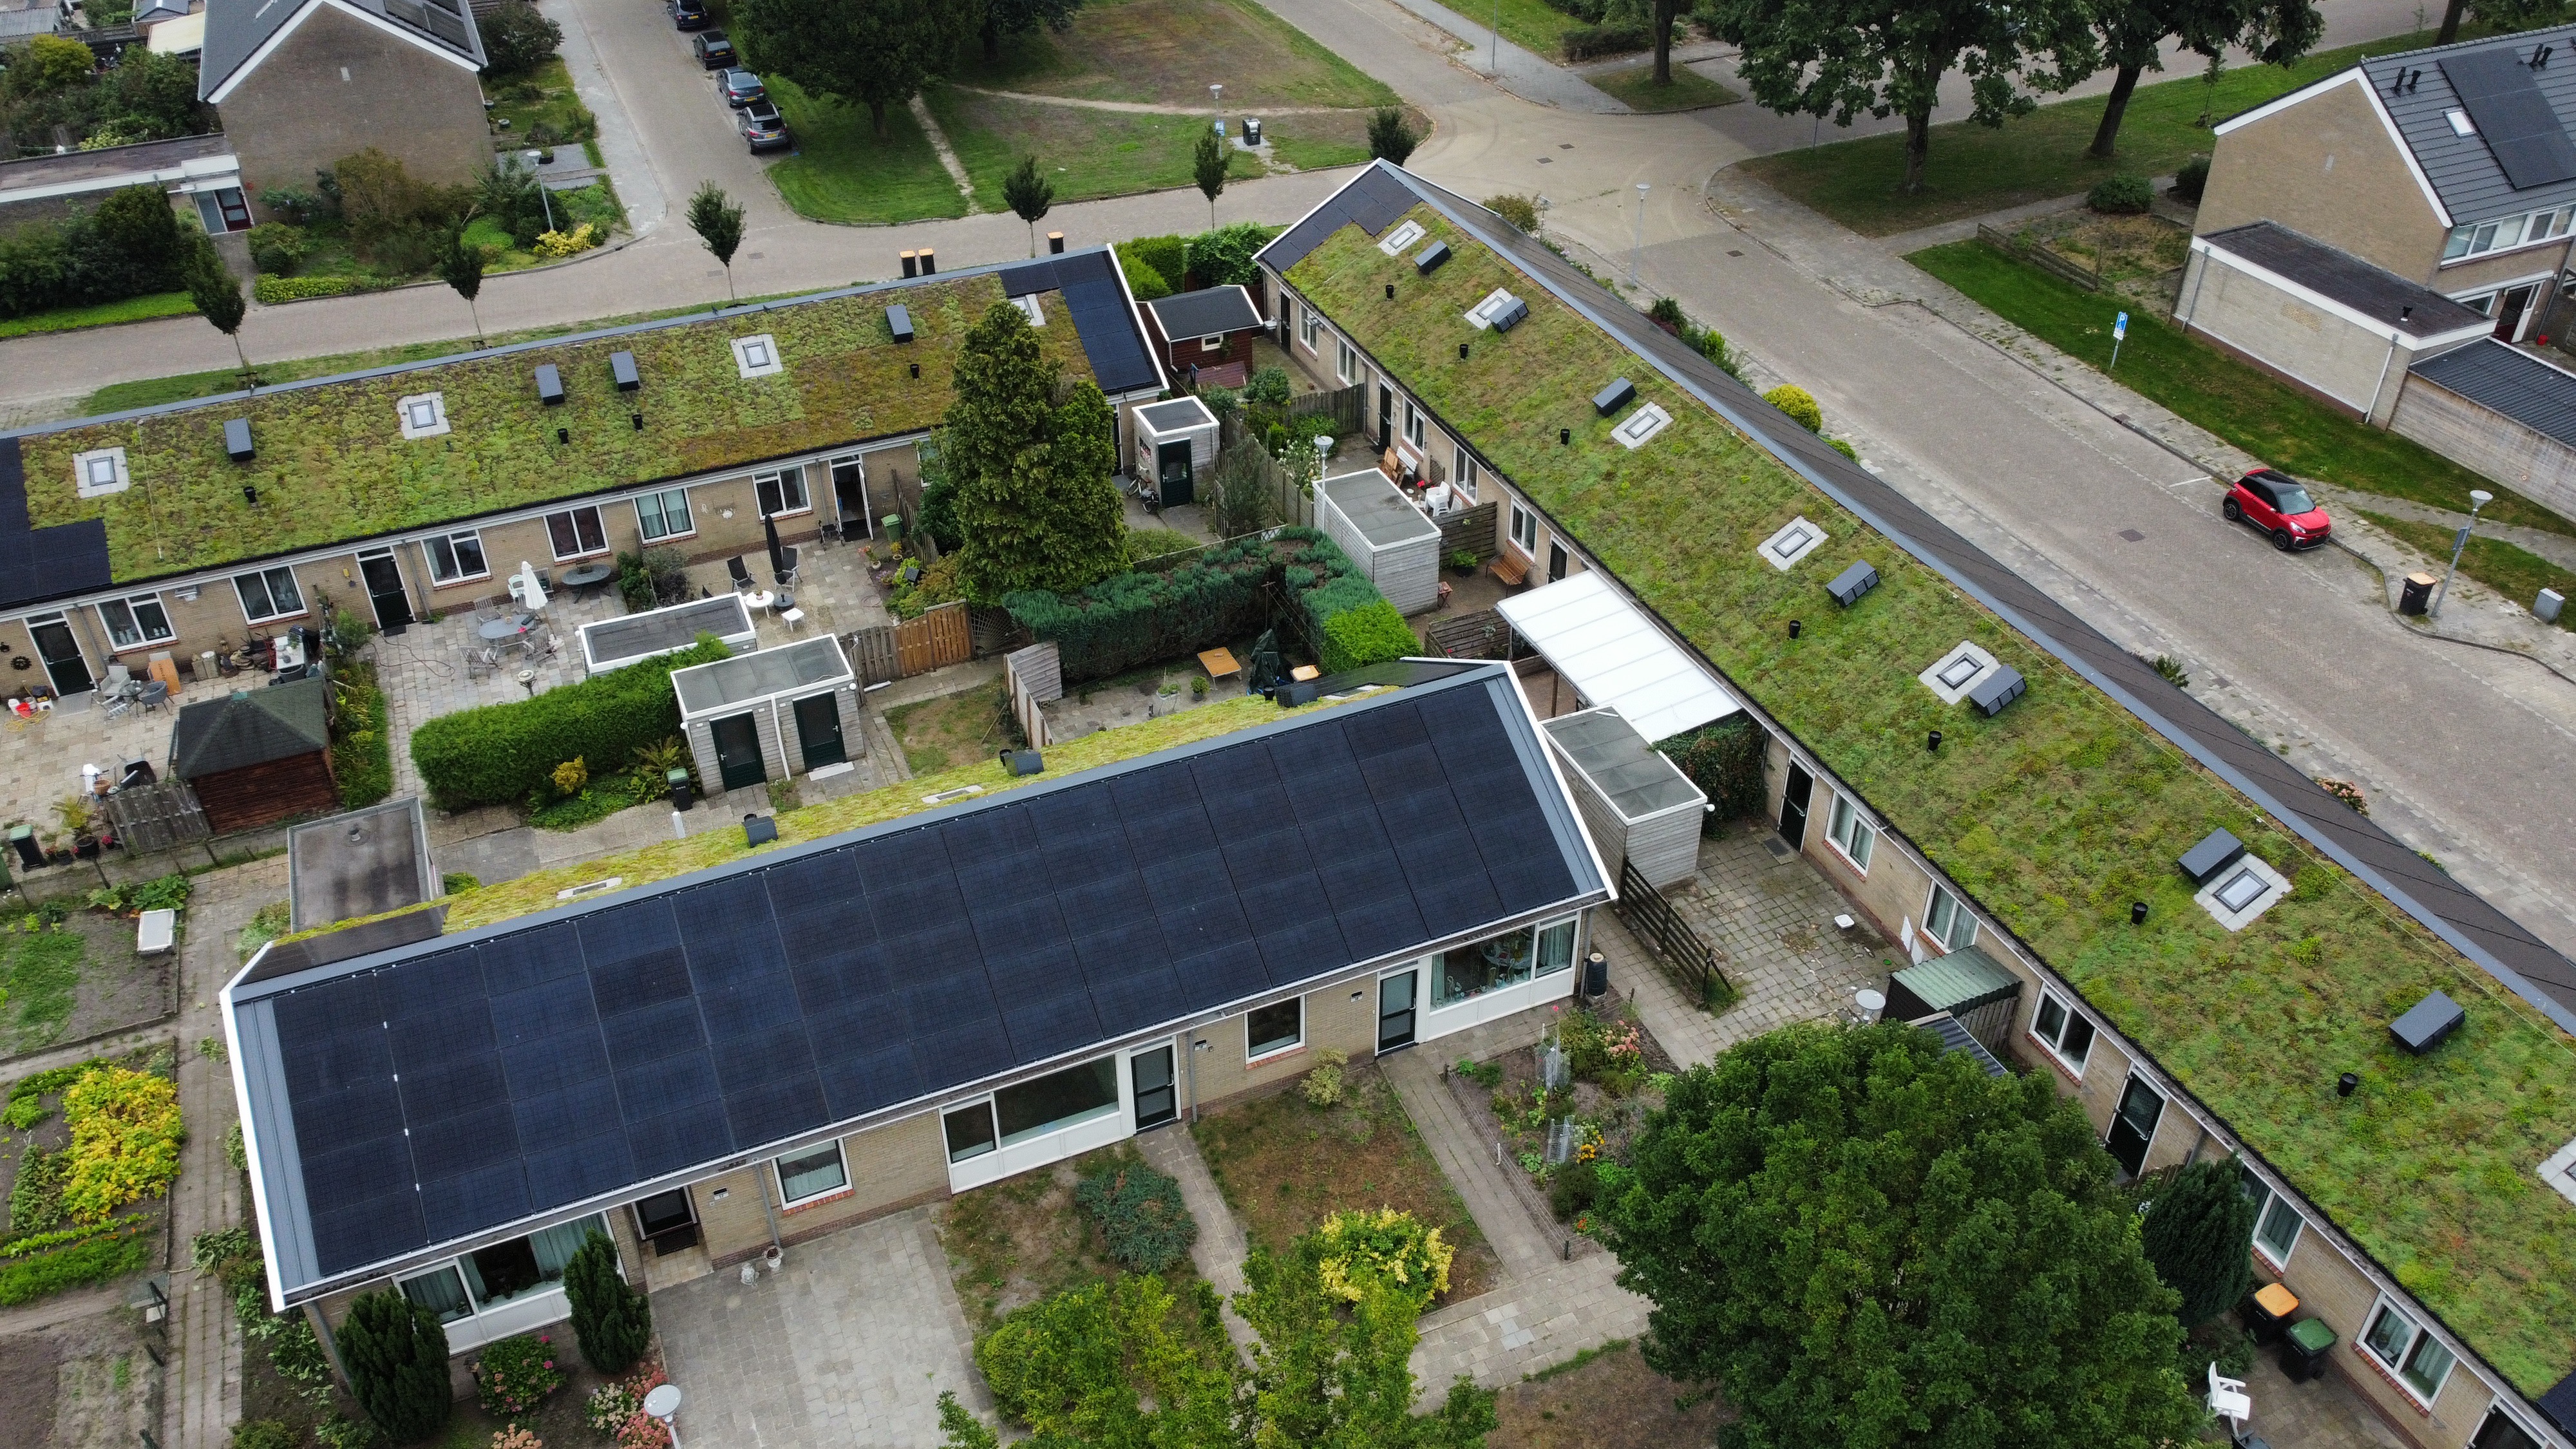 Pitched green roofs on homes